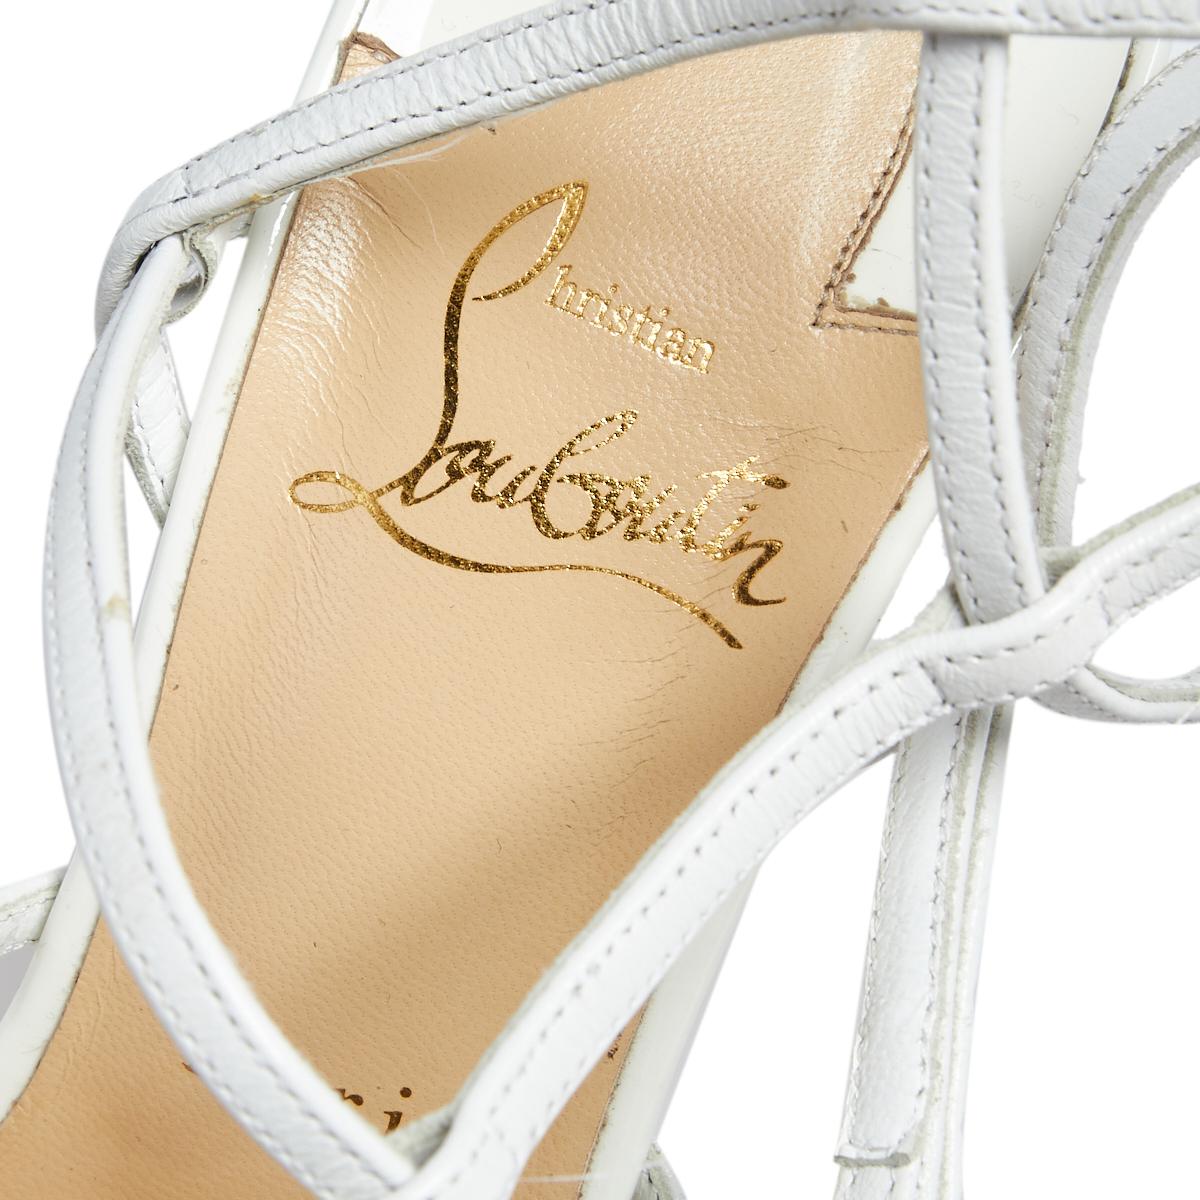 These Kadreyana sandals from the House of Christian Louboutin have been carved to deliver a sense of perfection and panache. Made from white leather, these sandals exhibit strappy details with subtly pointed toes, multiple buckle closures, and slim